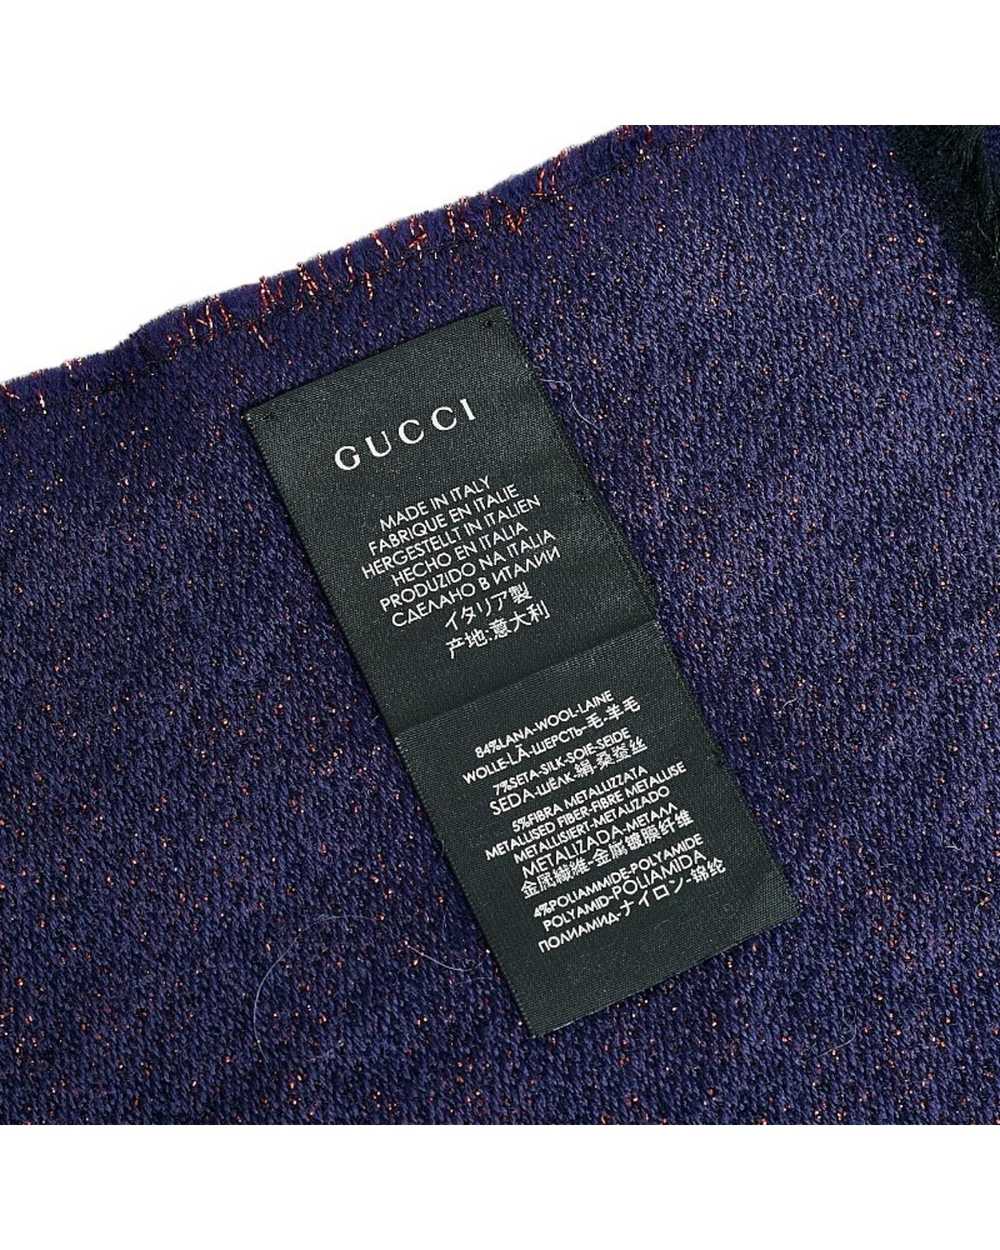 Gucci Navy and Red Wool-Silk Stole - image 5